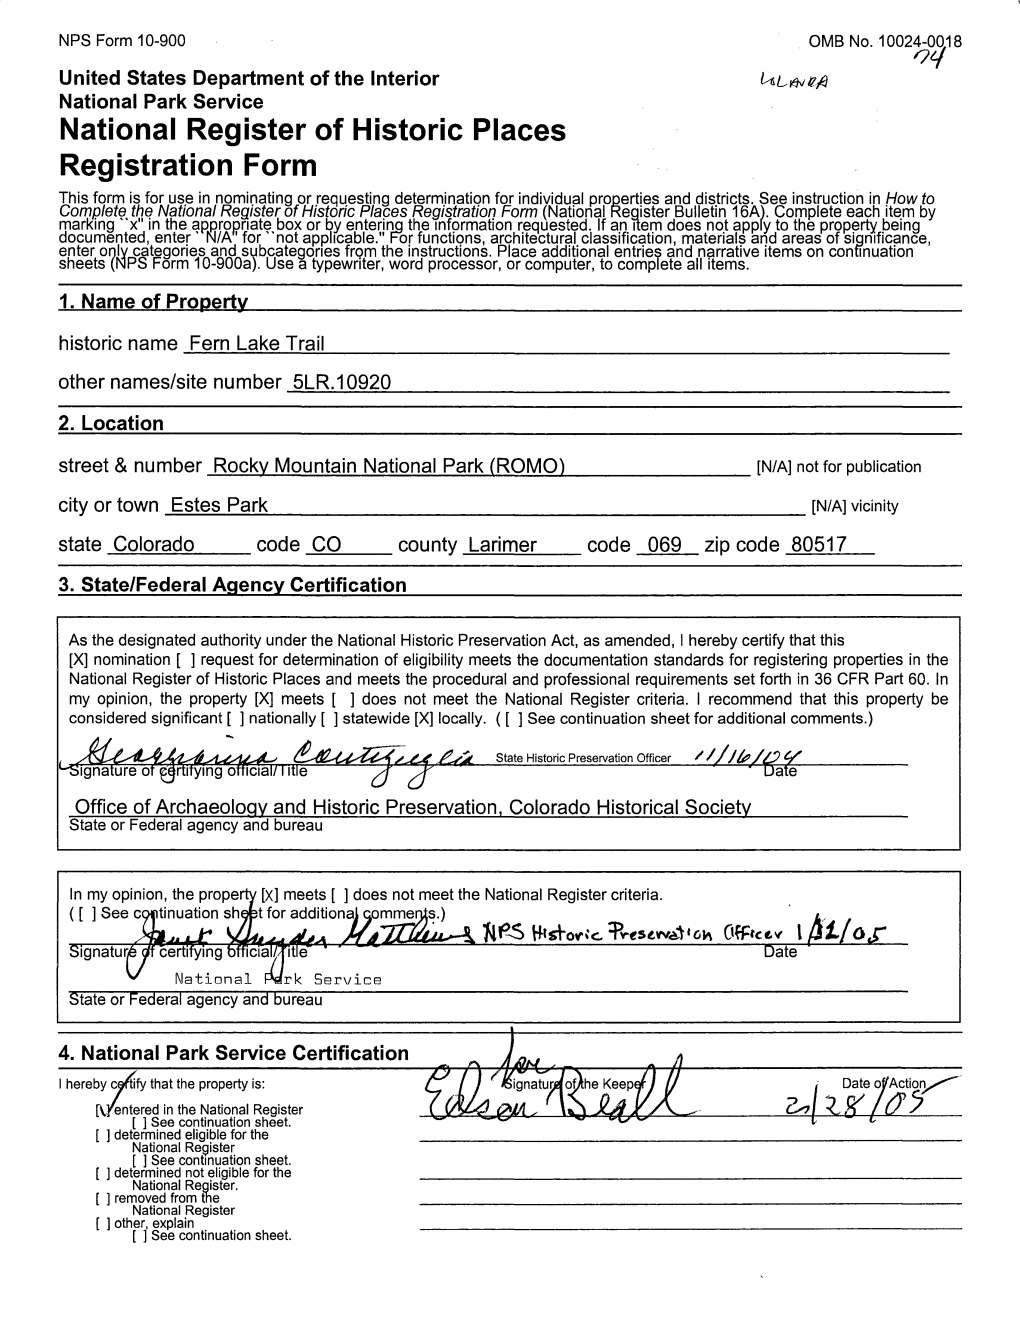 National Register of Historic Places Registration Form This Form Is for Use in Nominating Or Requesting Determination for Individual Properties and Districts